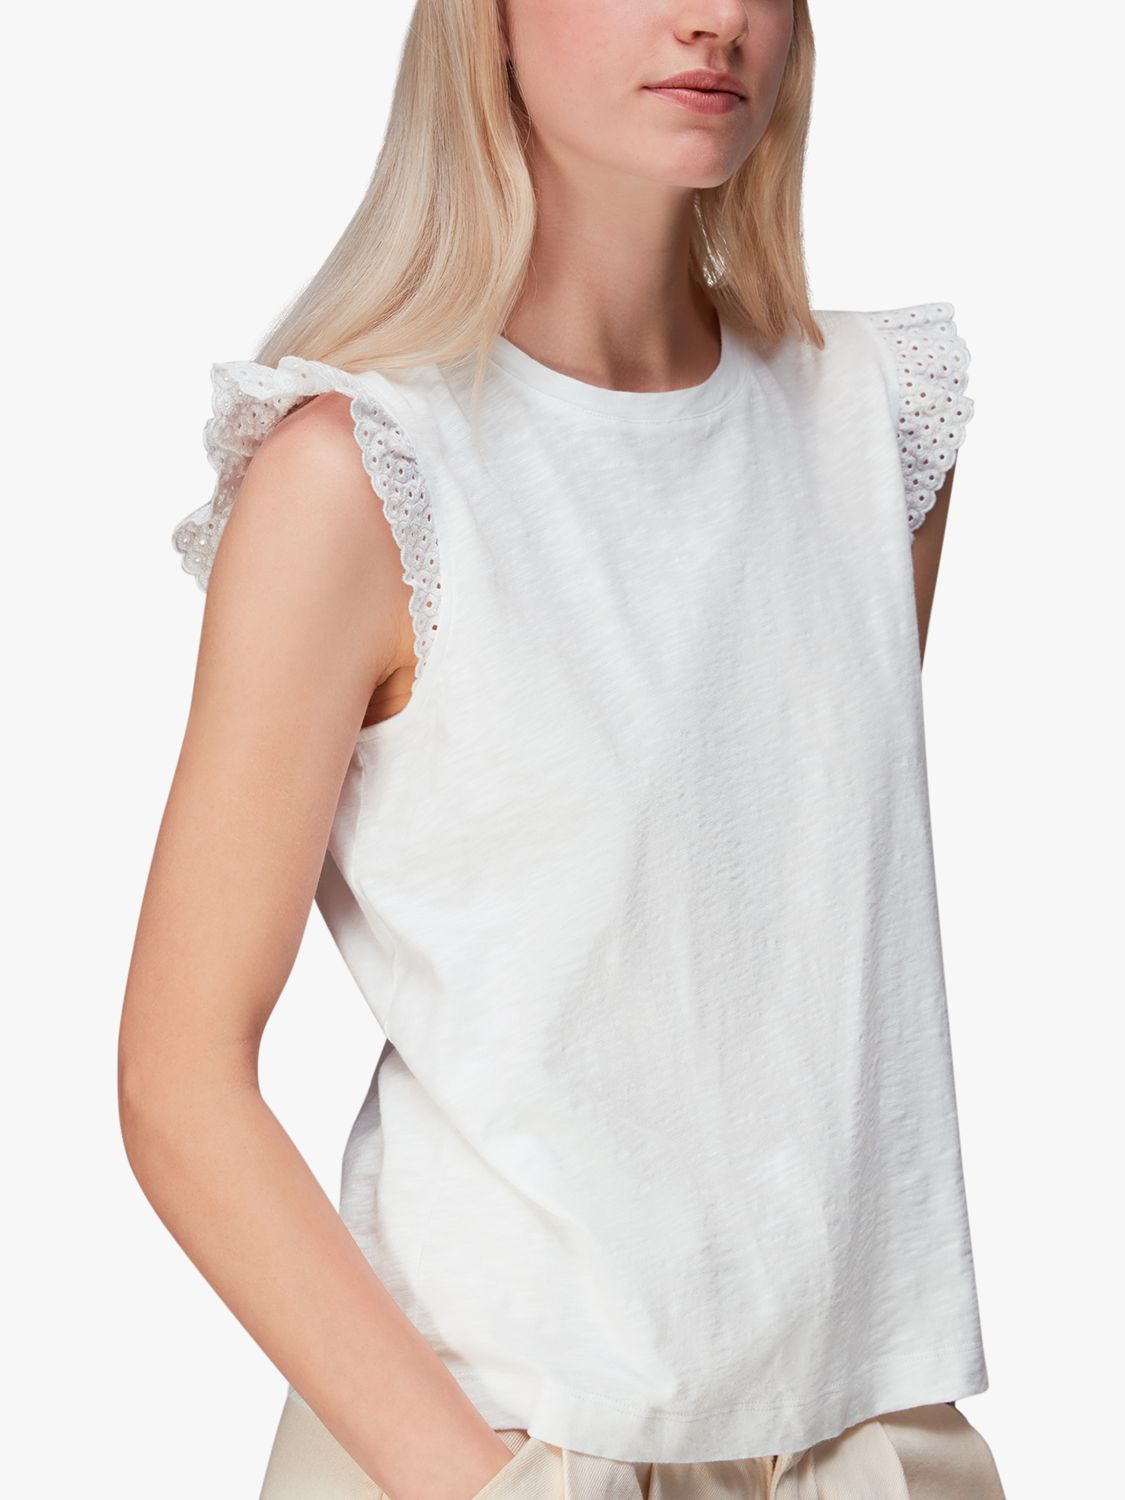 Whistles Broderie Frill Sleeve Top, White, M